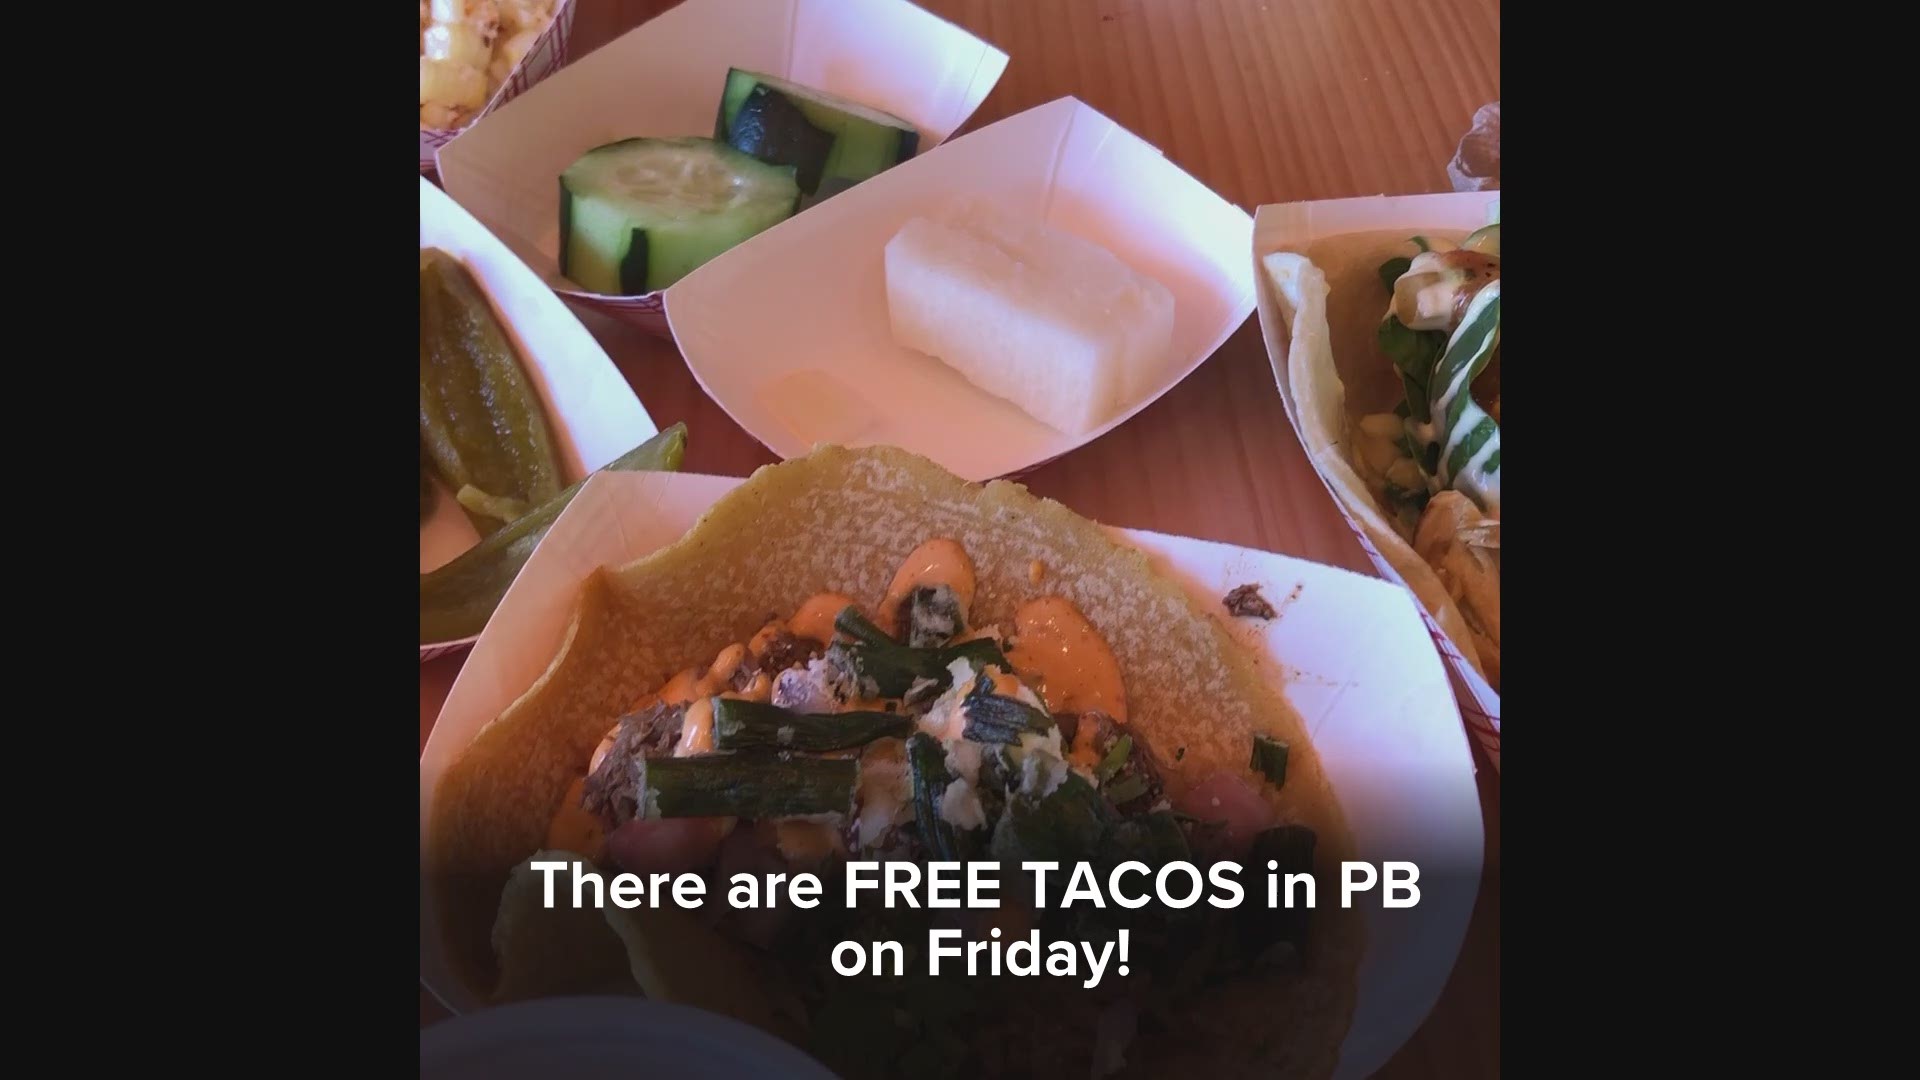 City Tacos announced unexpectedly on Wednesday that it would finally be opening its PB location on Friday after months of construction.